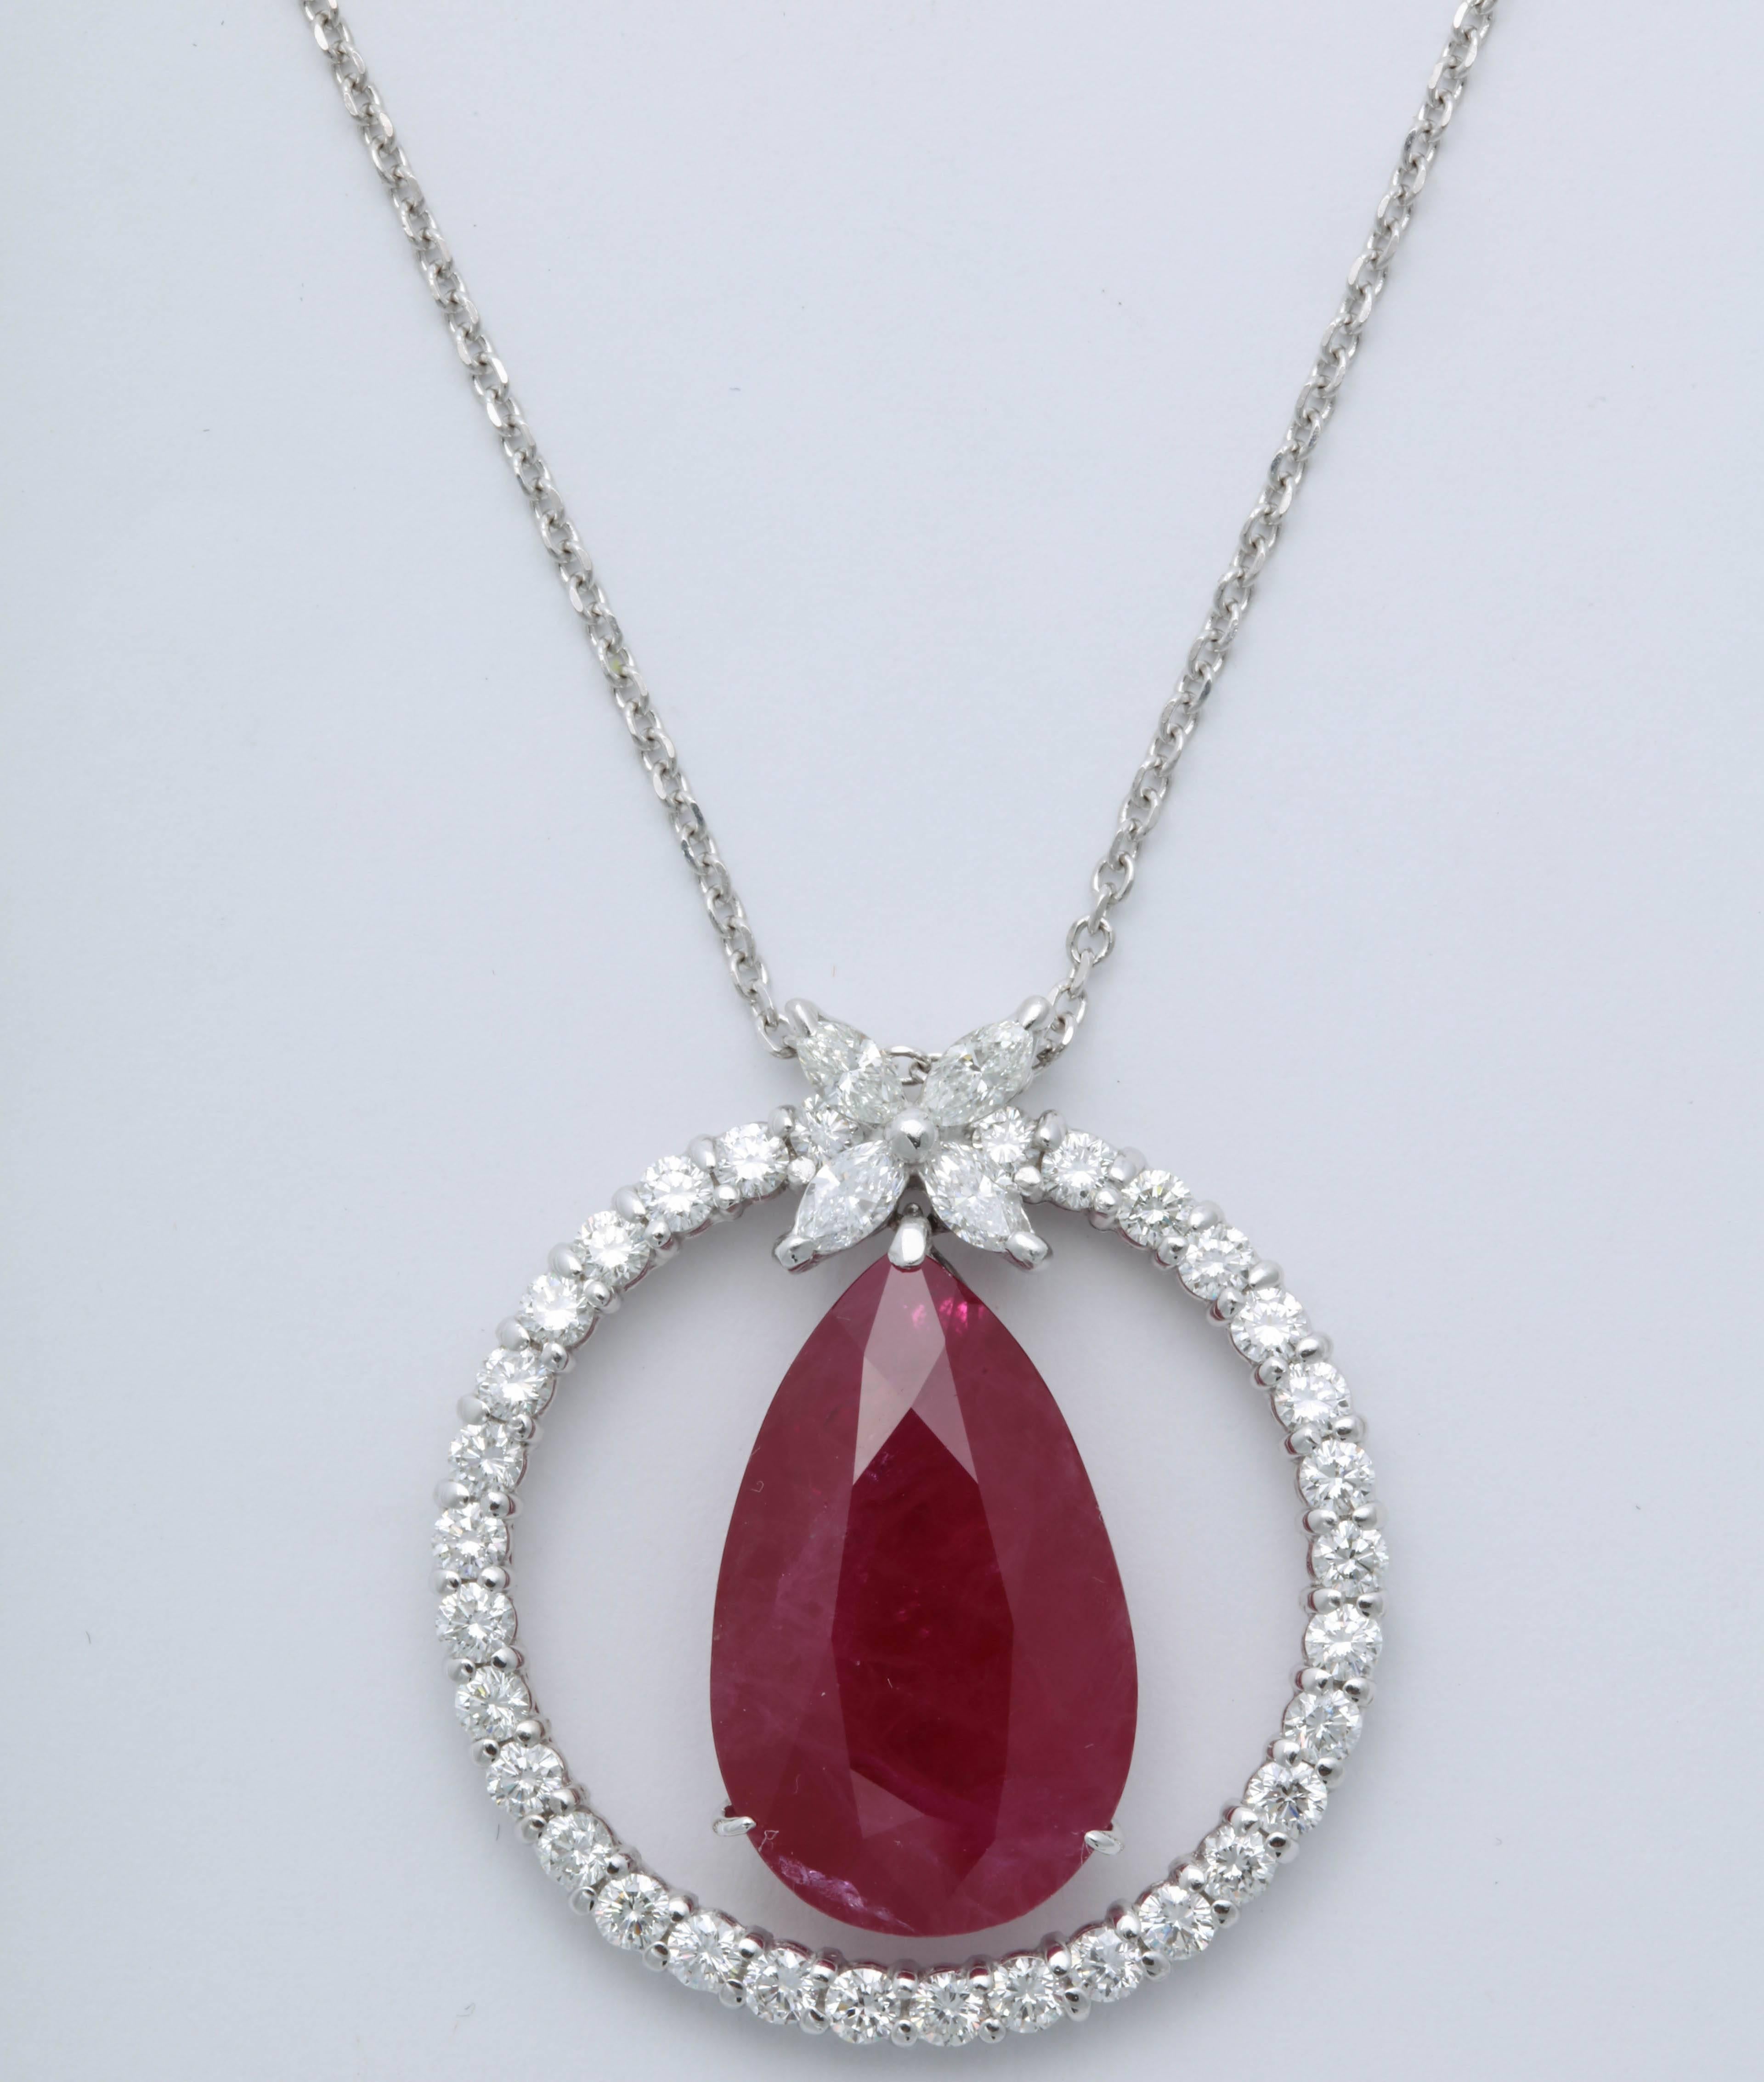 

A unique and stunning piece!!

11.62 carat pear shape Burma Ruby certified by GIA. 

2.08 carats of marquise and round white diamonds. 

18k white gold 

The pendant is hanging from an 18 inch white gold chain.

The pendant is approximately 1.15